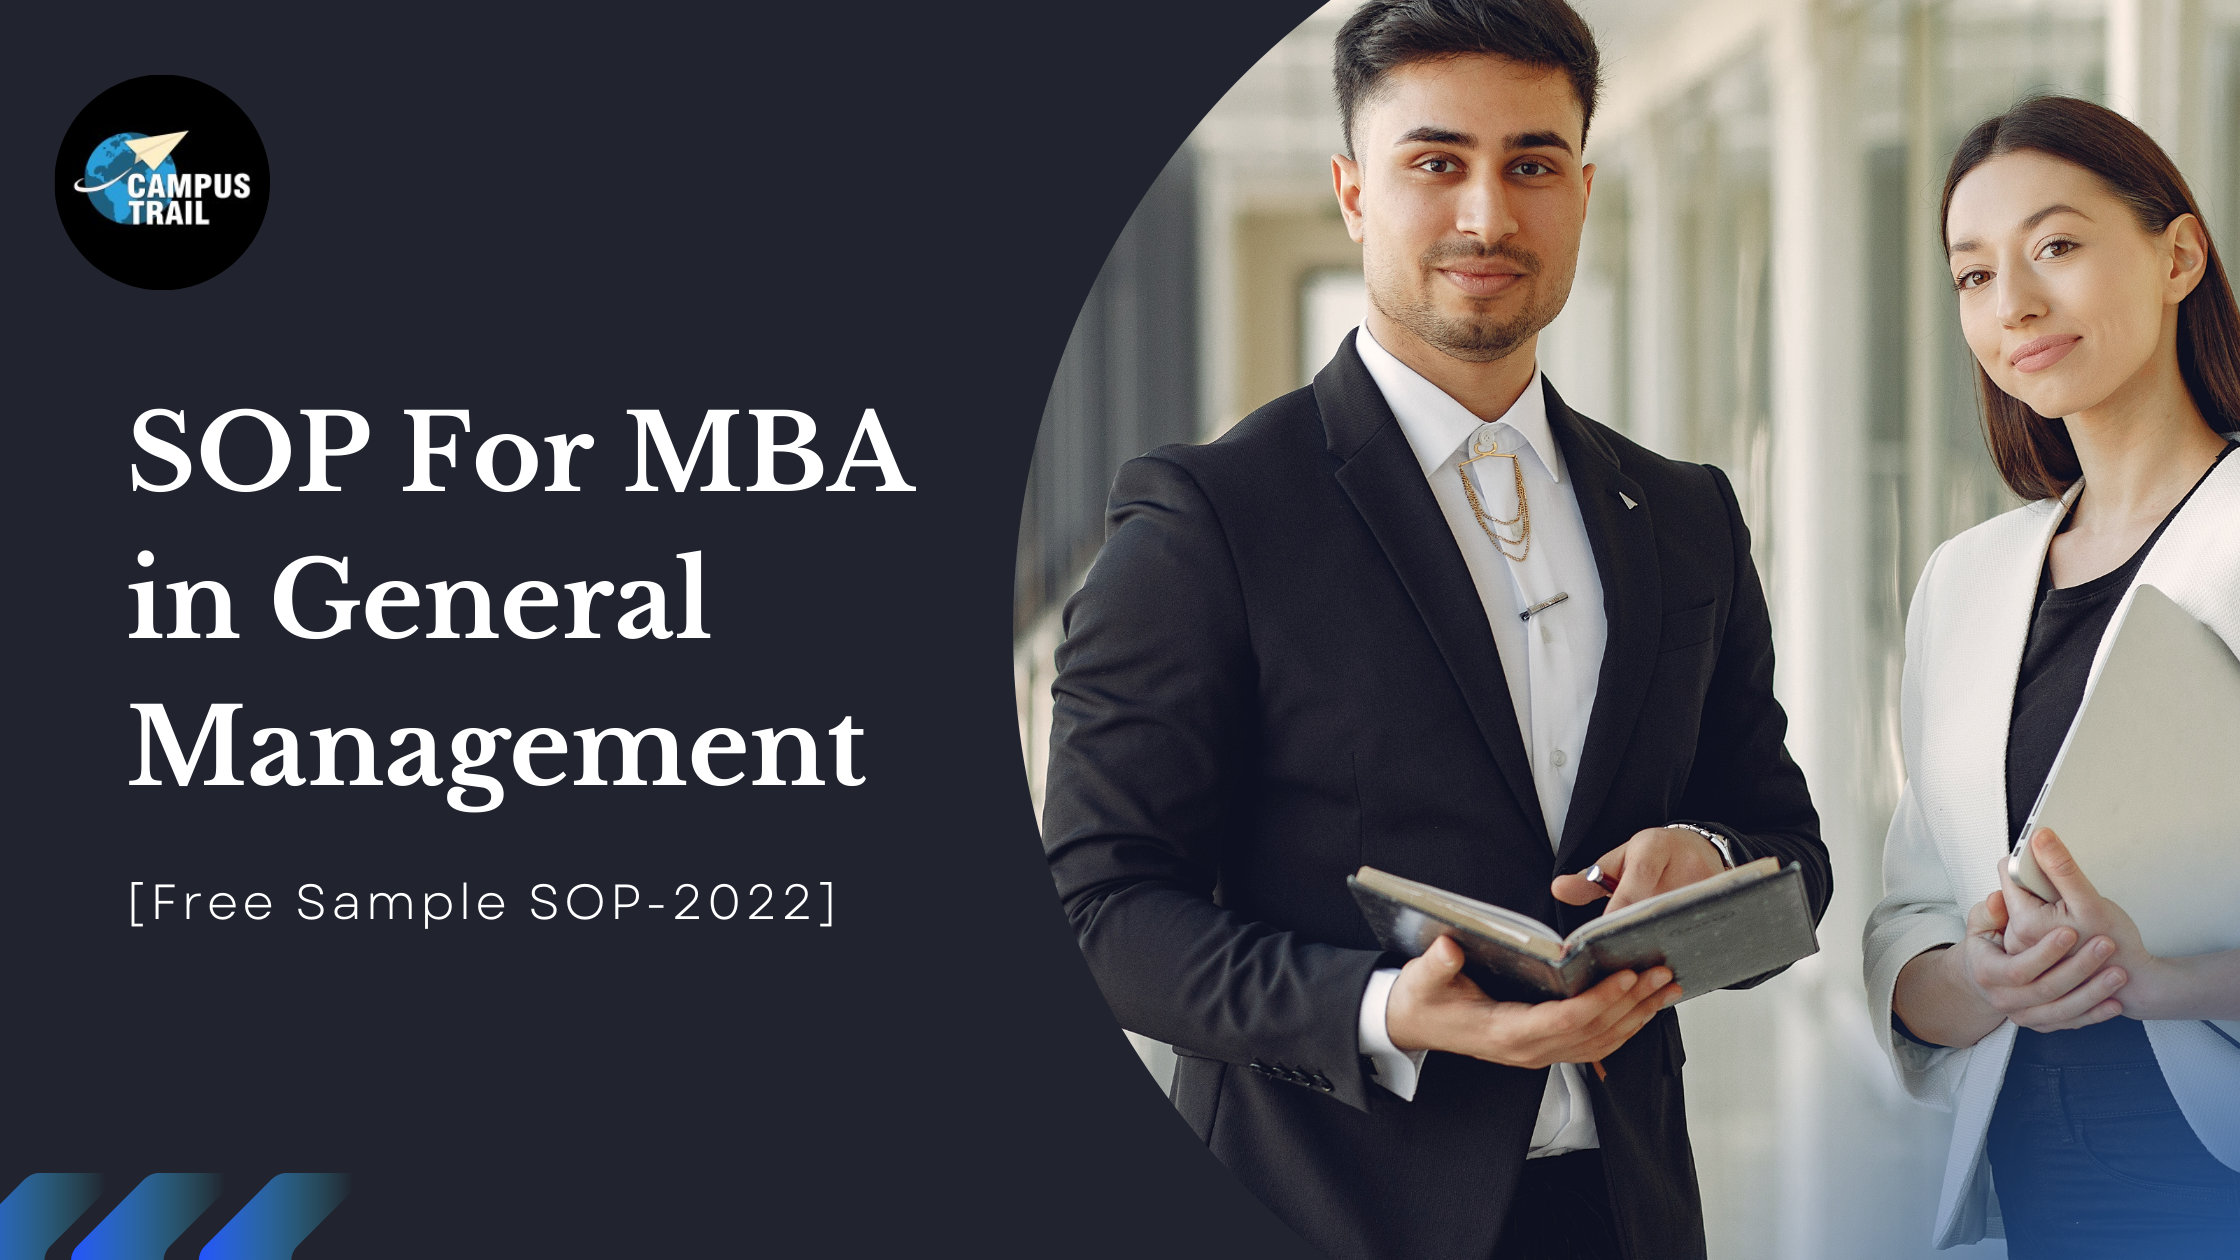 You are currently viewing SOP For MBA in General Management [Download Free Sample SOP – 2022]